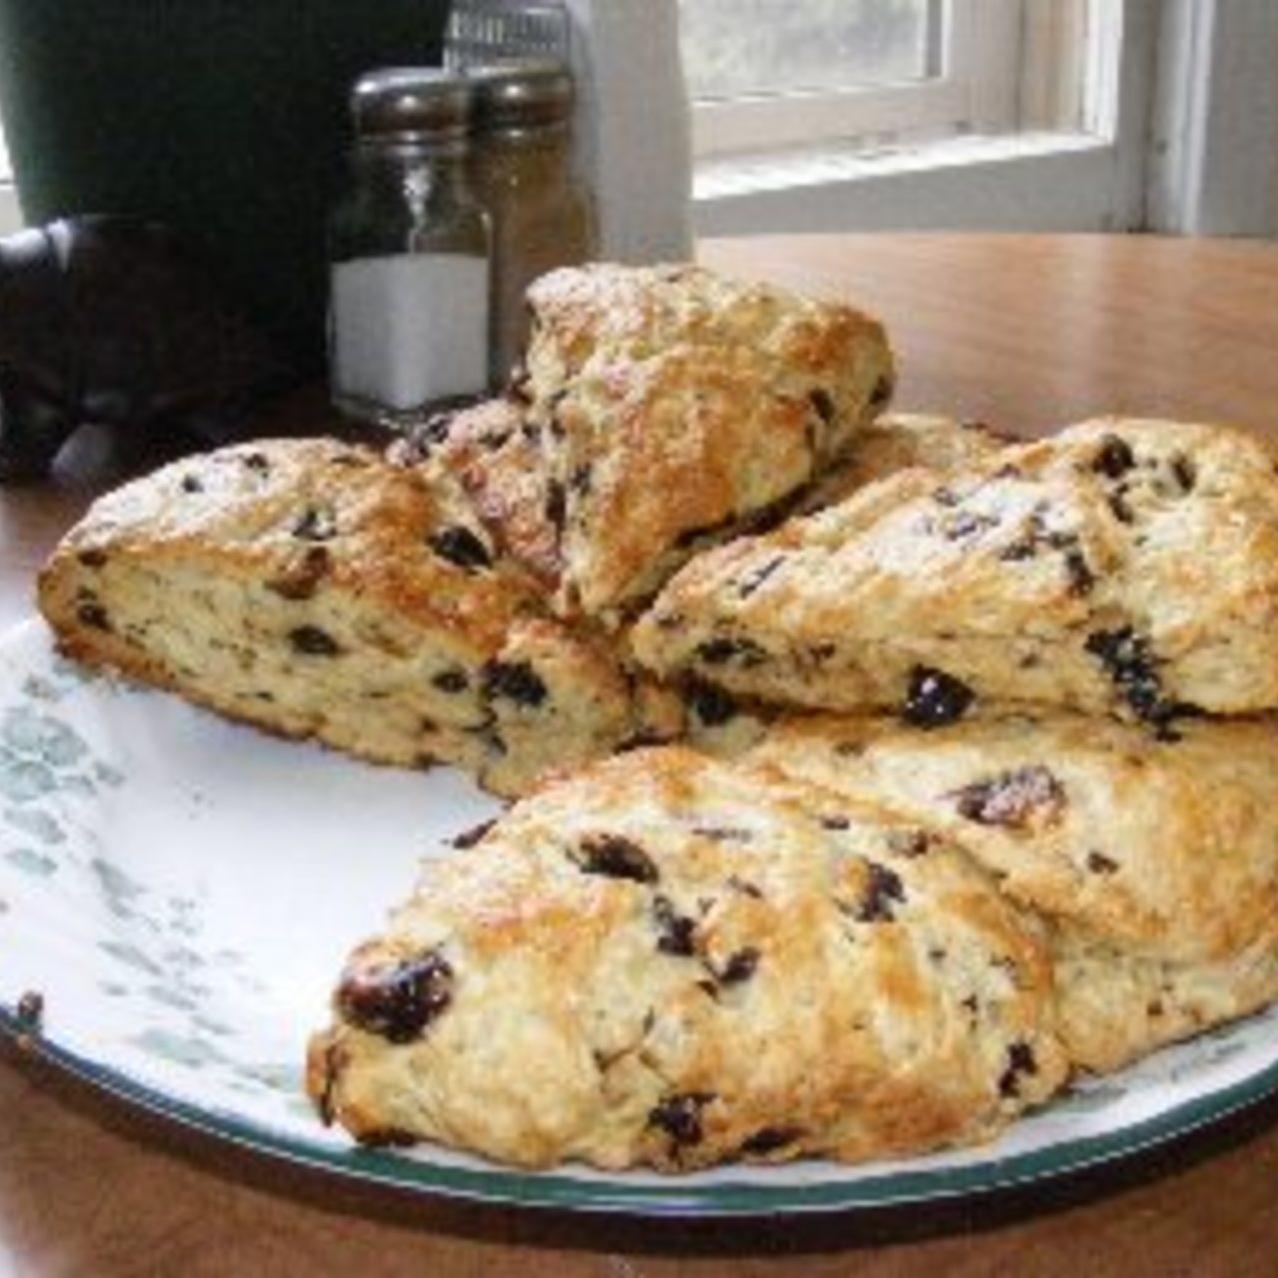  These scones are the perfect way to start any morning, especially when they're still warm and fresh out of the oven.